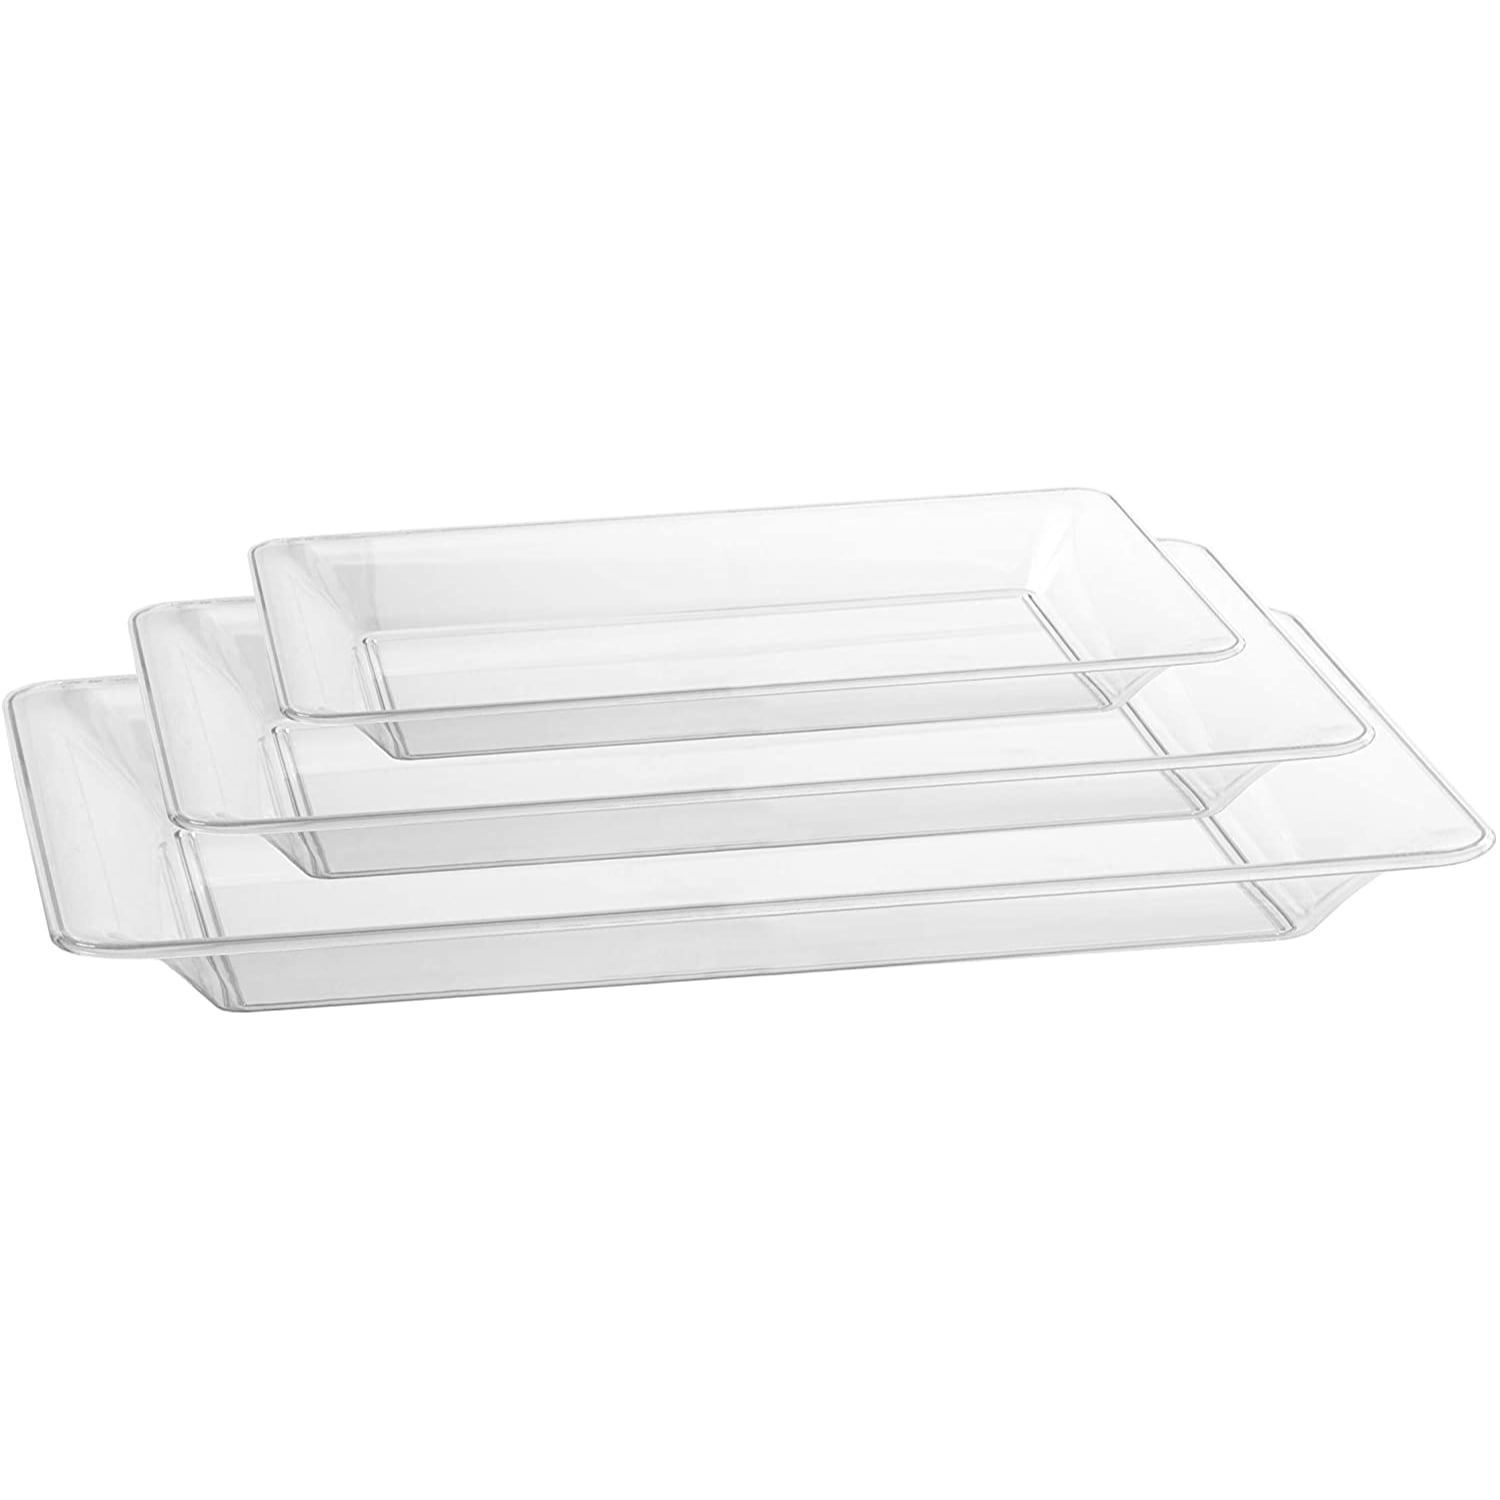 14 inch Clear Flat Elegant Trays with Lid - 25 Pack (370146)